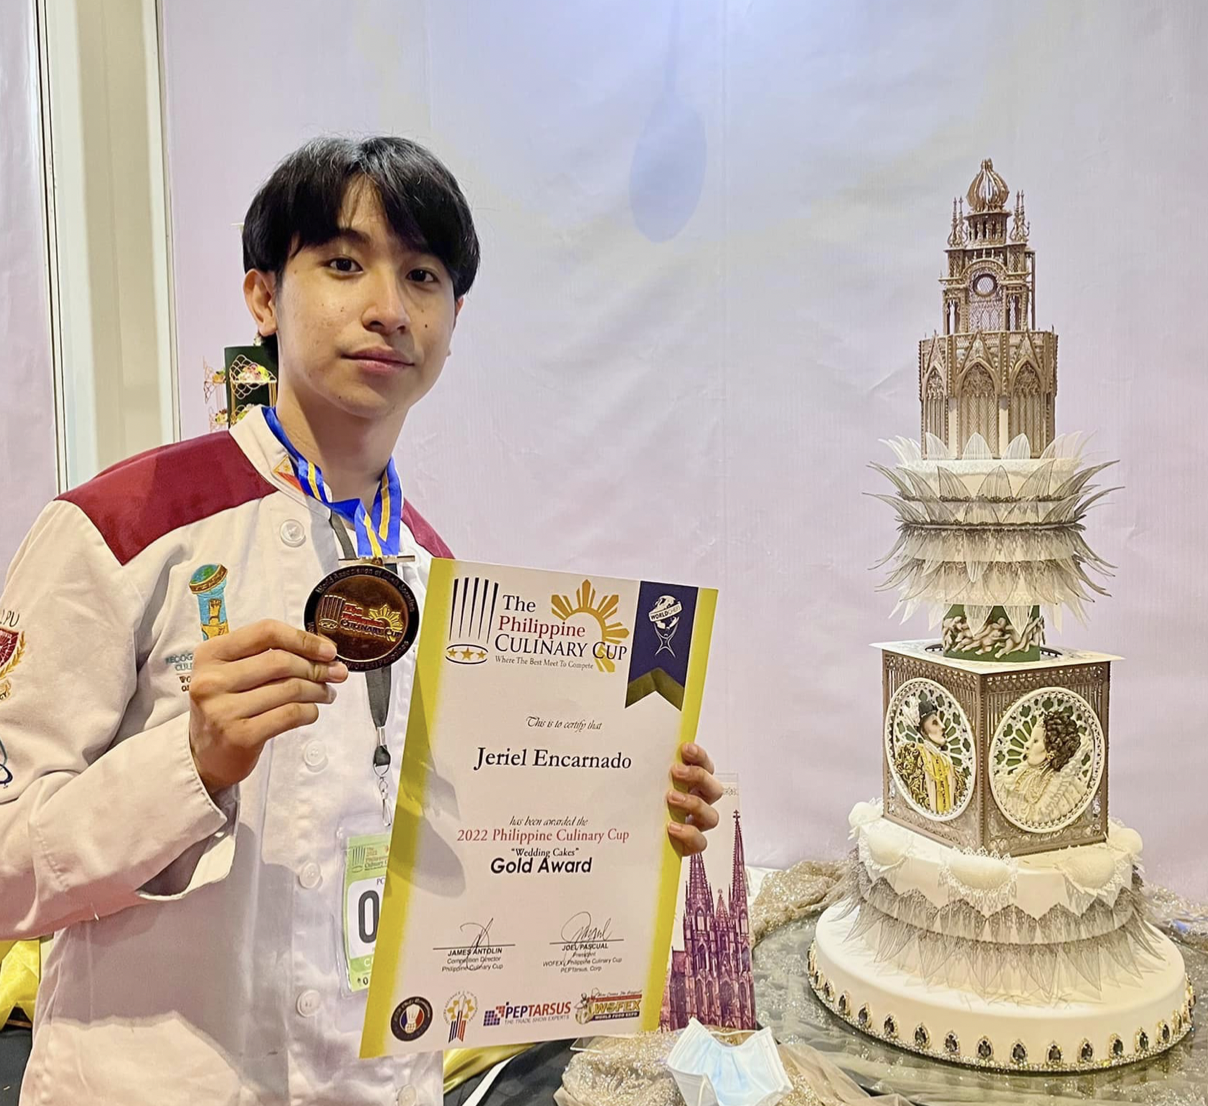 Jeriel Encarnado with his prize-winning cake design. Image from his Facebook account